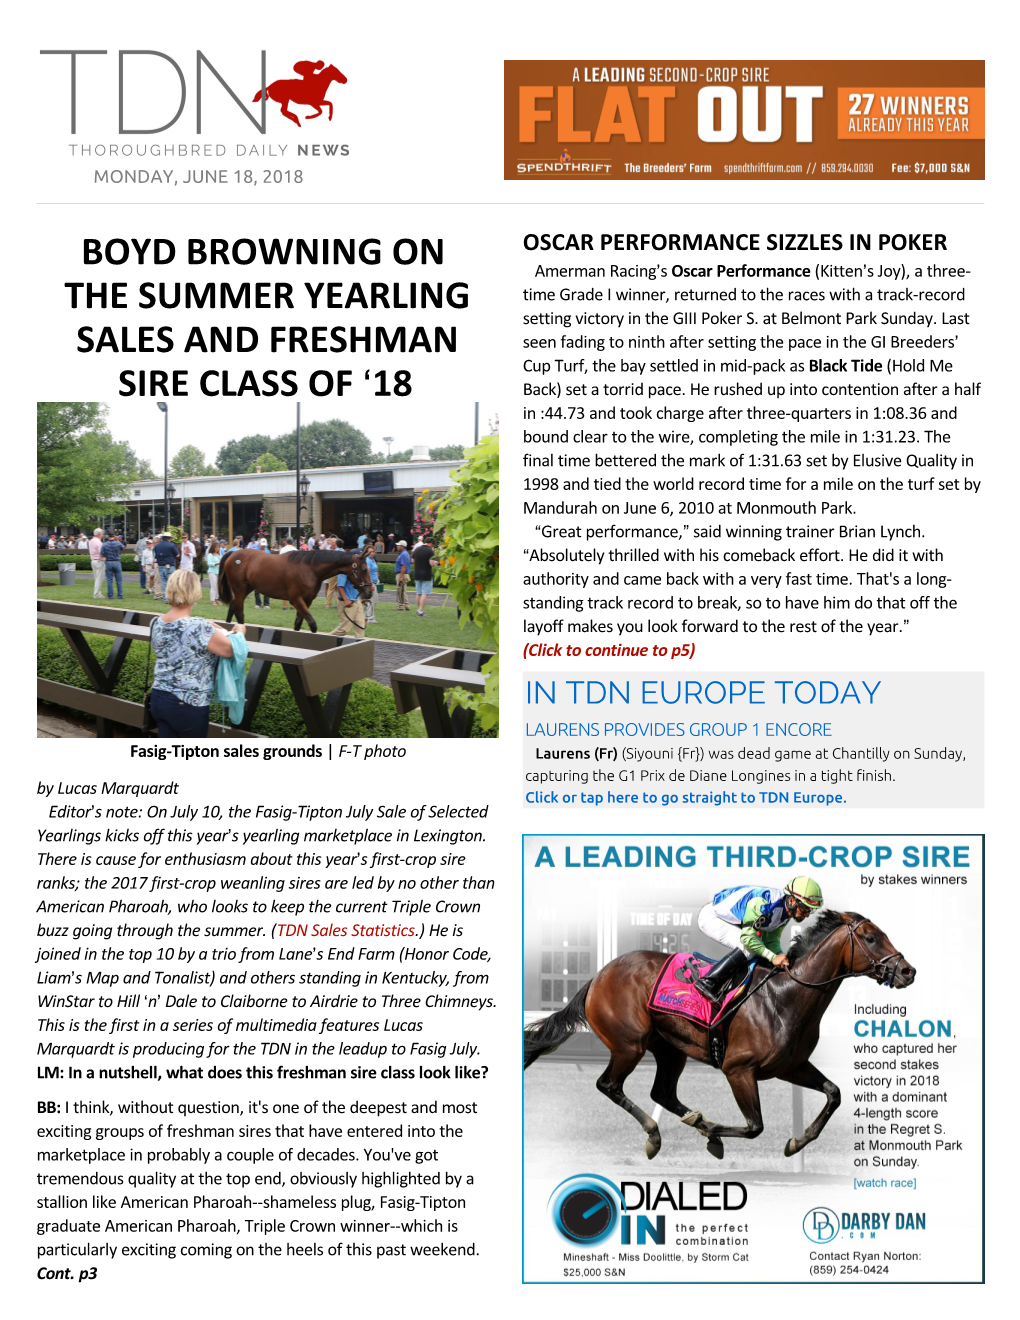 Boyd Browning on the Summer Yearling Sales And